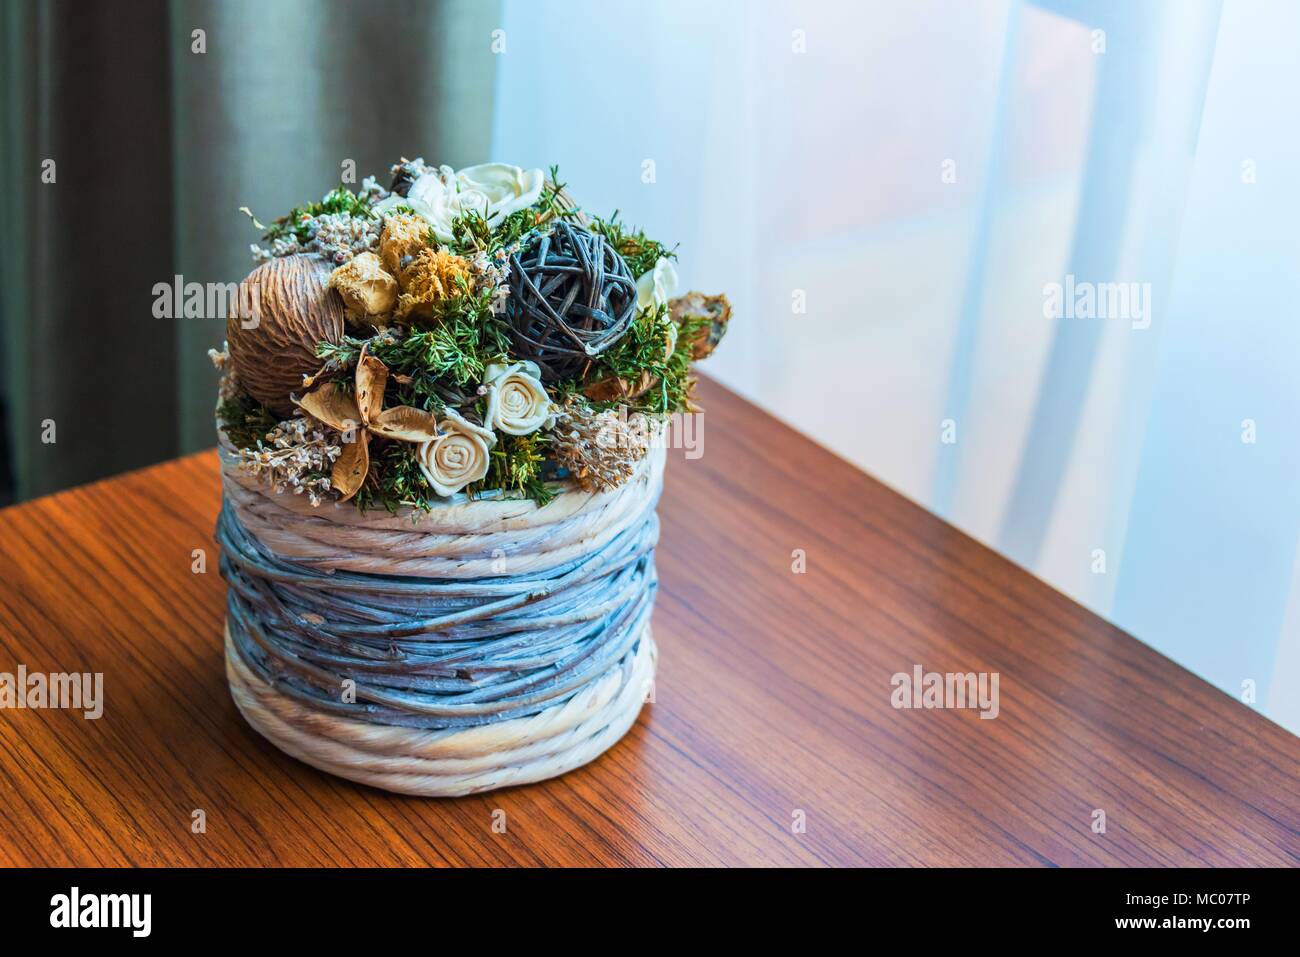 Close up of a wicker flower pot with dried flowers arrangement over a wooden table by the window. Stock Photo